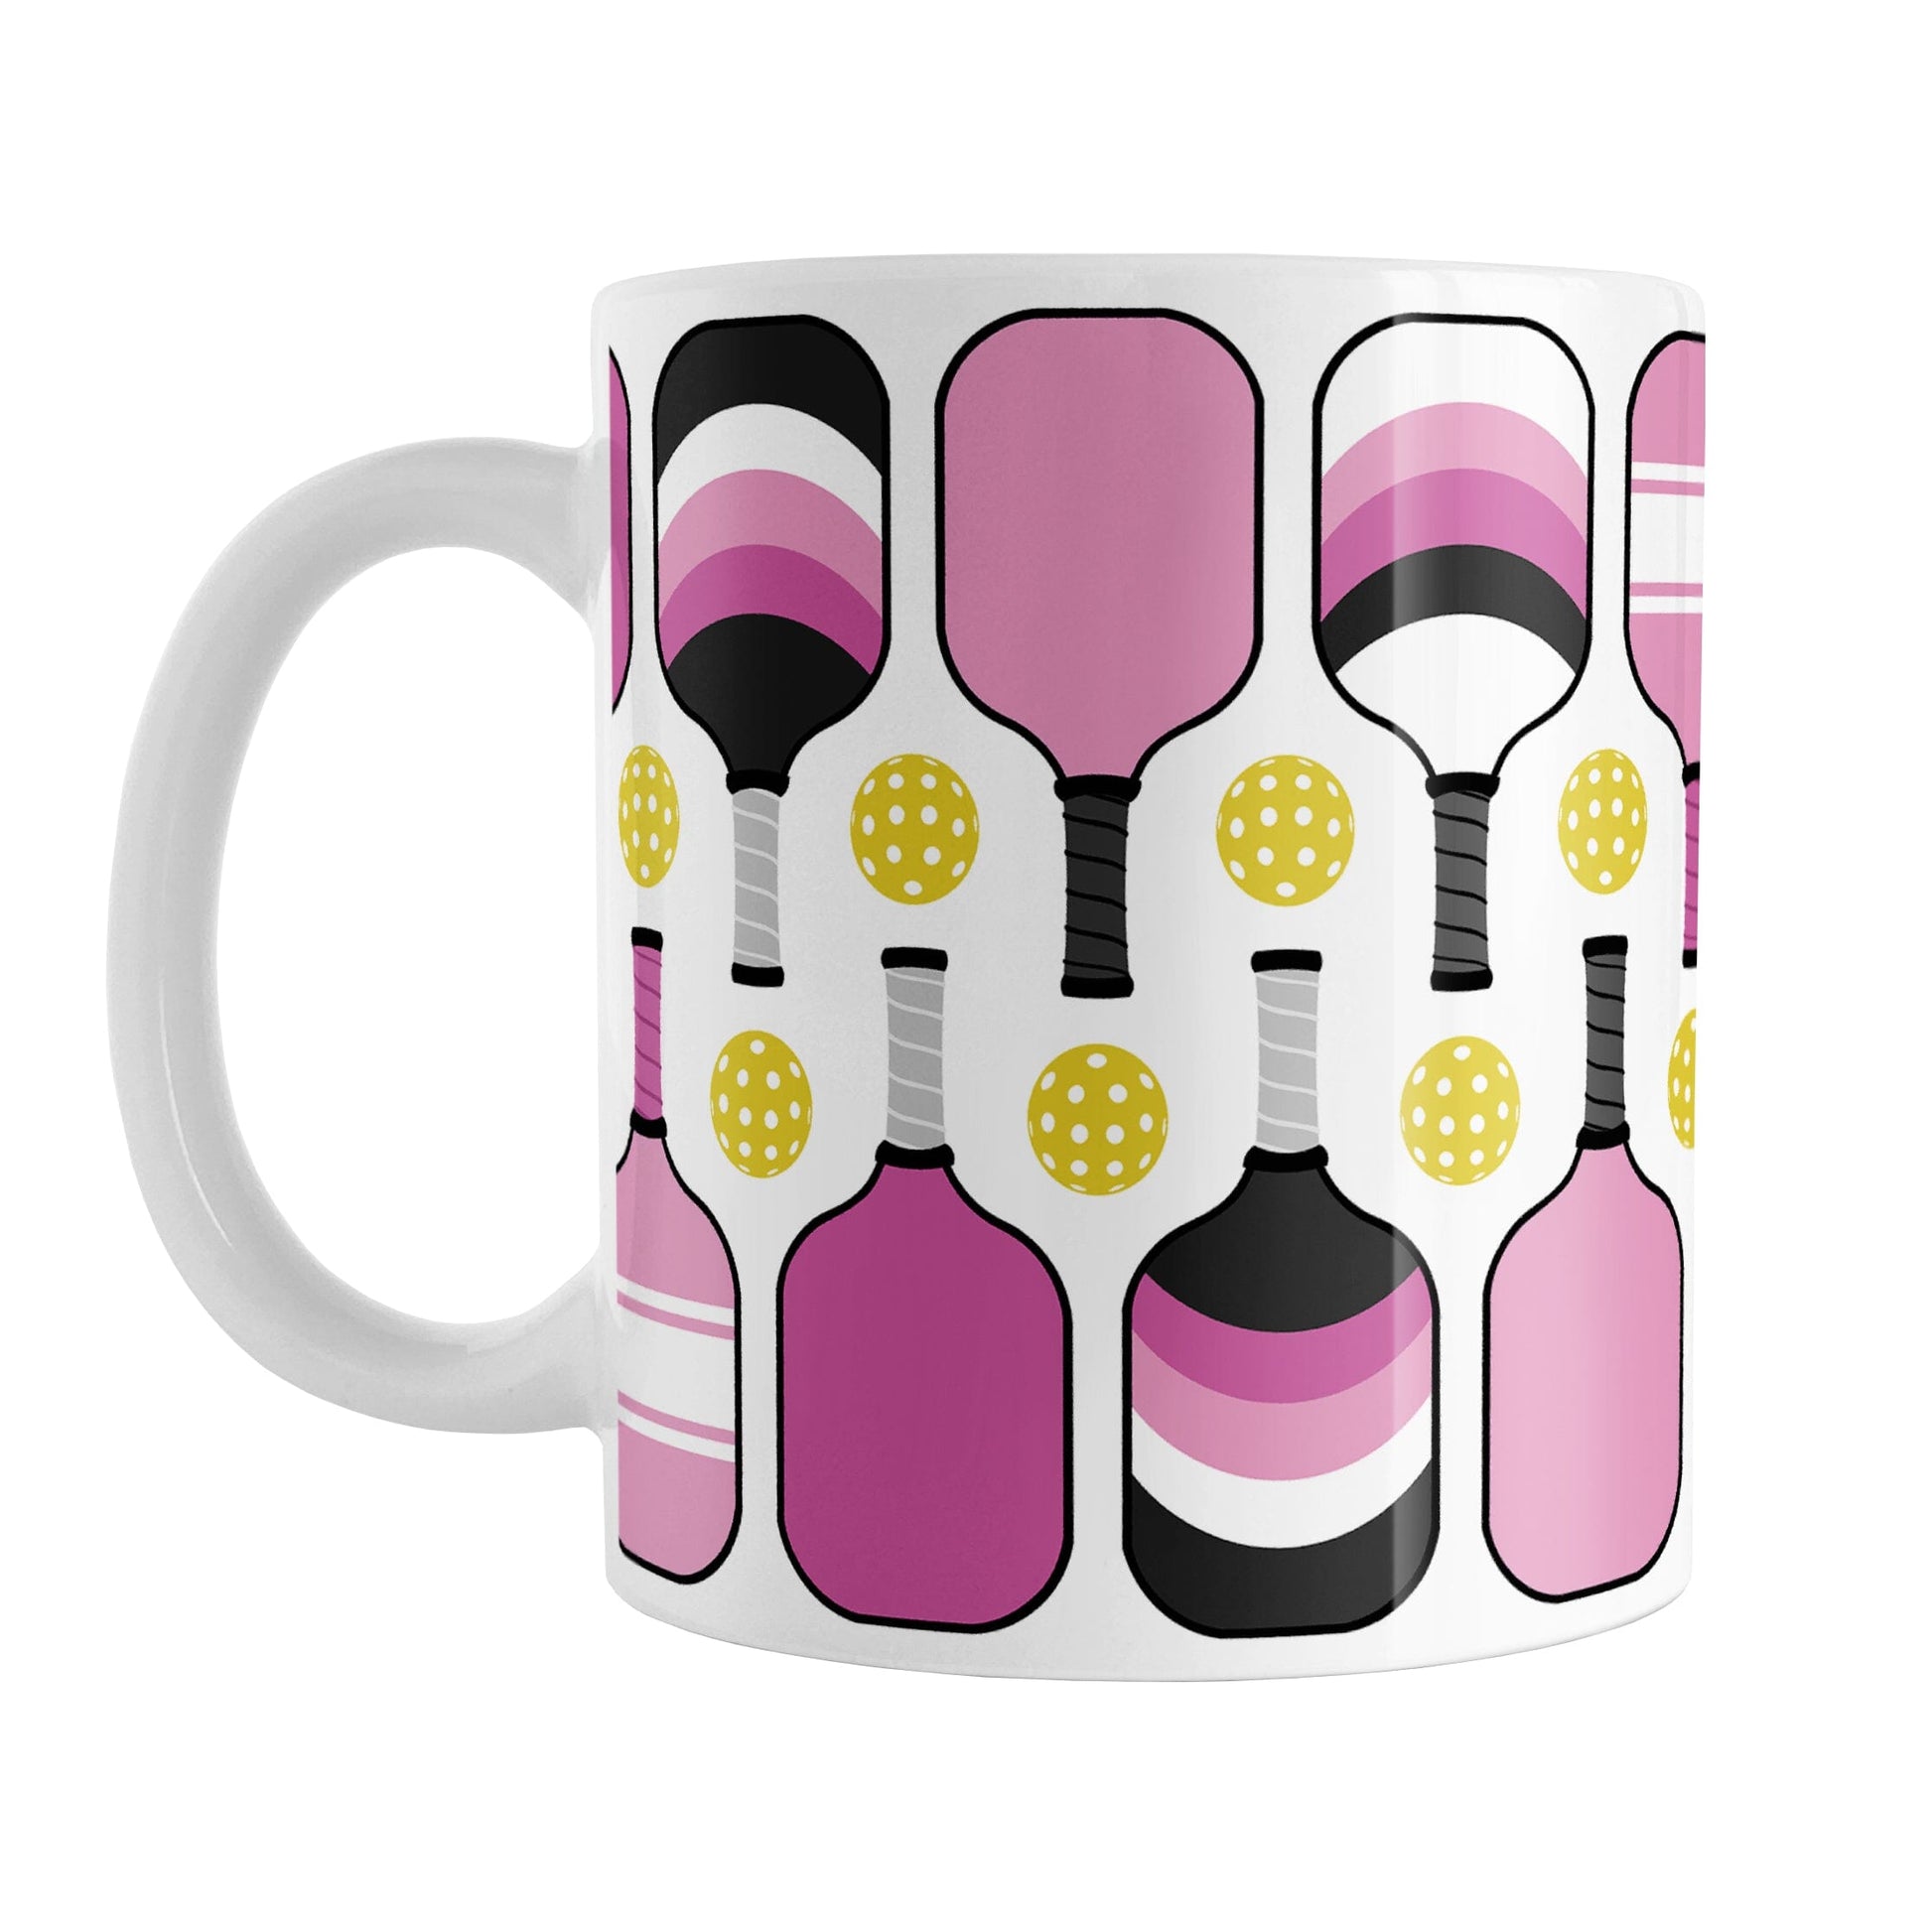 Pink Pickleball Mug (11oz) at Amy's Coffee Mugs. A ceramic coffee mug designed with modern pink pickleball paddles and yellow balls in a pattern that wraps around the mug up to the handle.